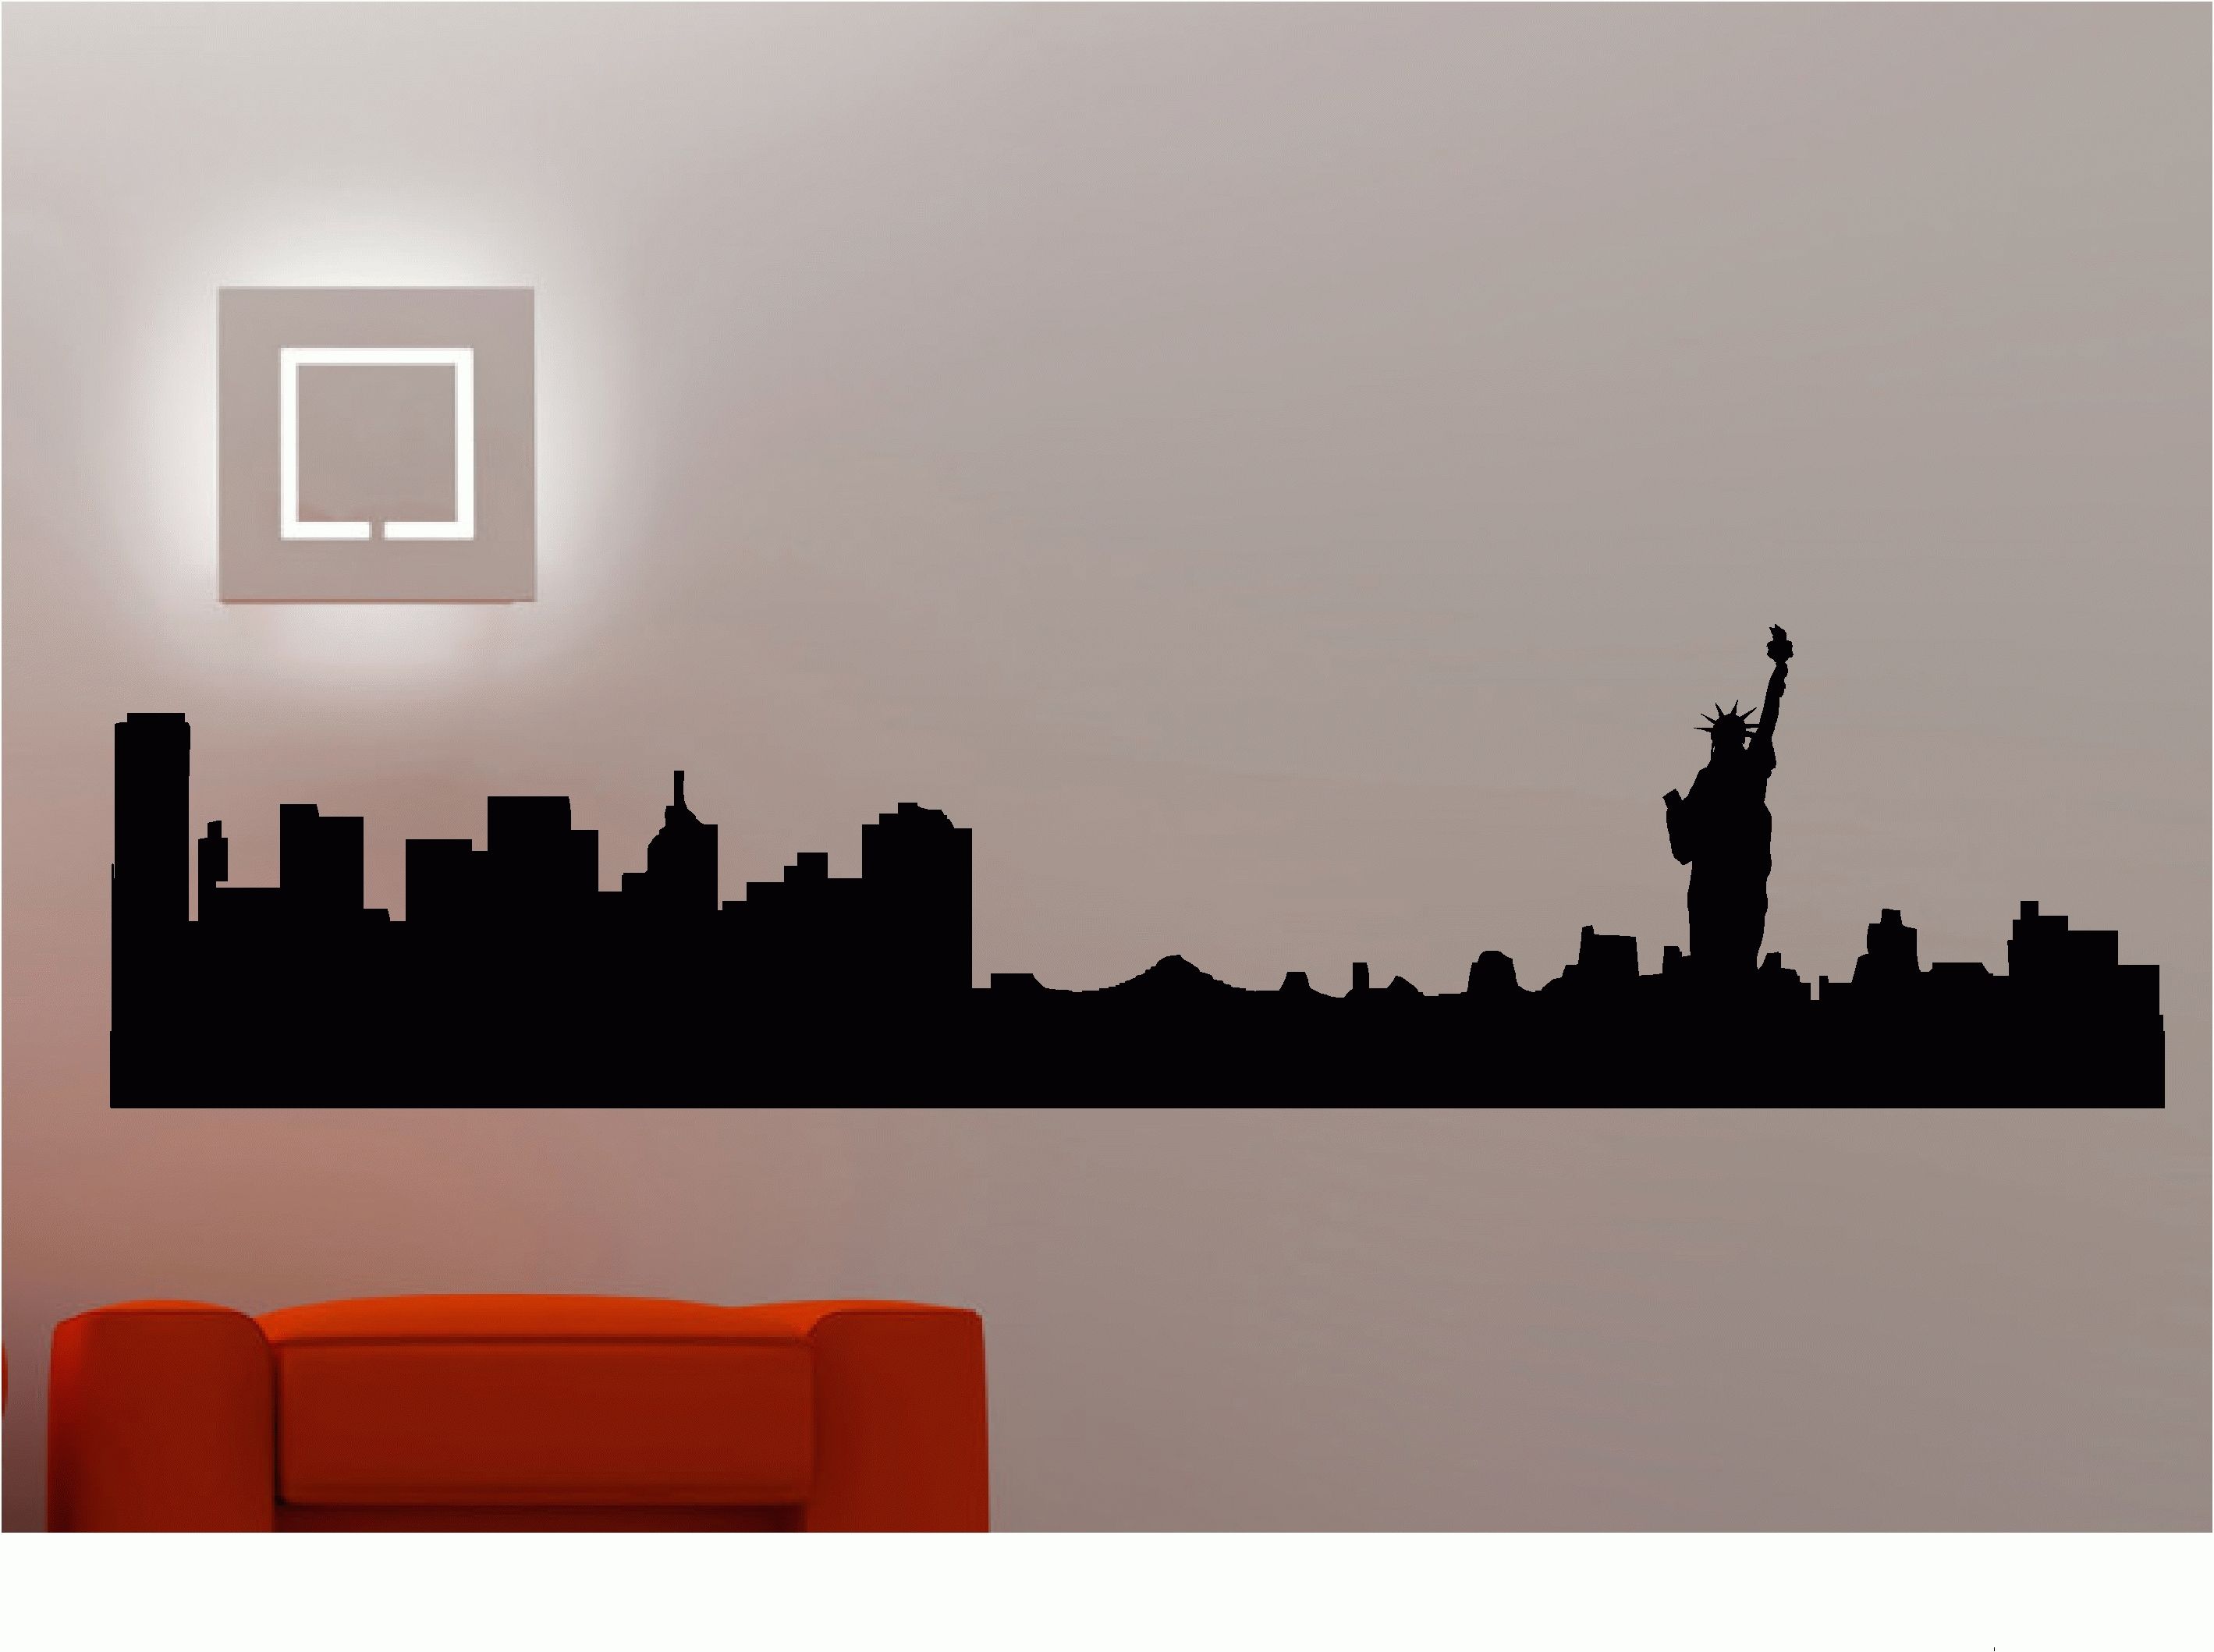 New York City Skyline Wall Stickers / Wall Decals Vinyl Art Decals With Regard To New York City Wall Art (View 9 of 20)